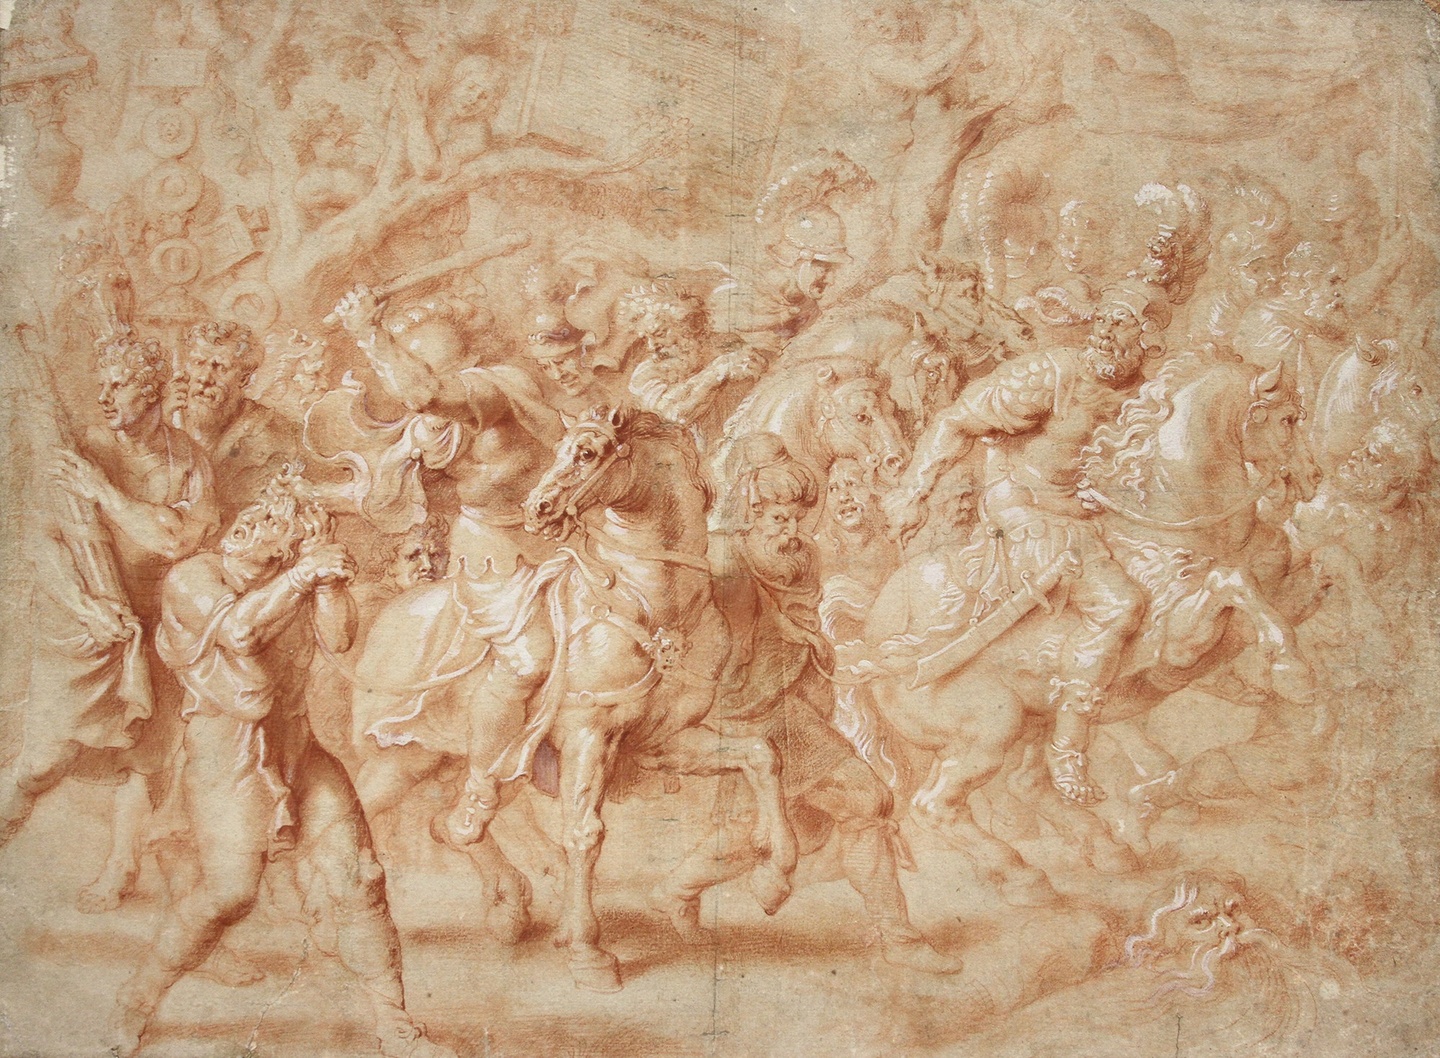 Artwork made of red chalk and wash on tinted paper, depicting riders on horses charging through a crowd of figures from Greco-Roman antiquity arrayed for battle; additional images are faint in the background.